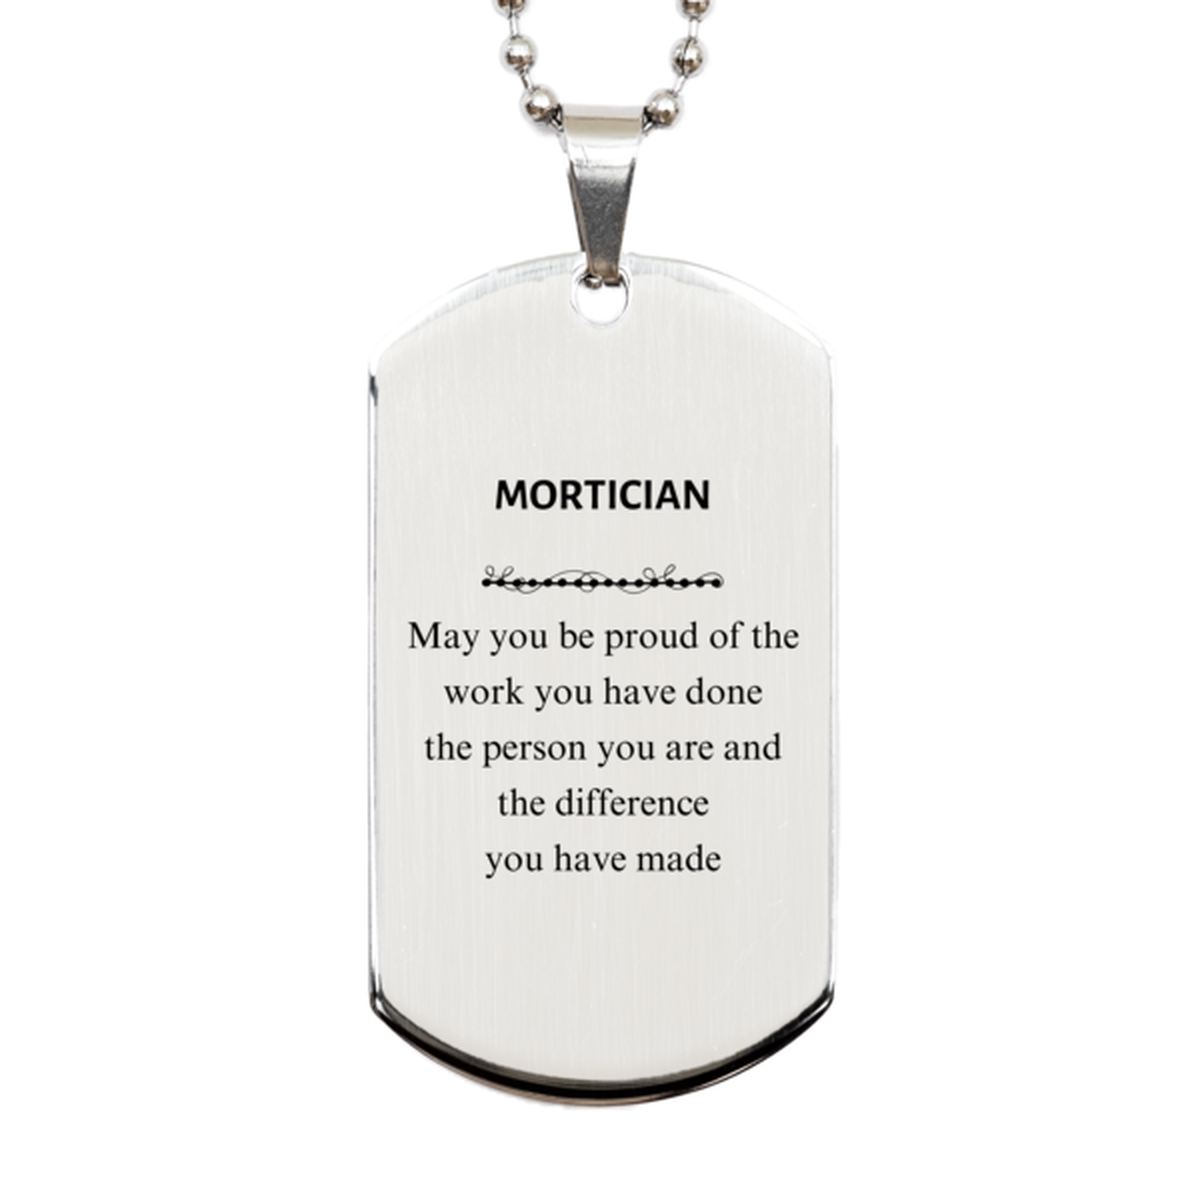 Mortician May you be proud of the work you have done, Retirement Mortician Silver Dog Tag for Colleague Appreciation Gifts Amazing for Mortician